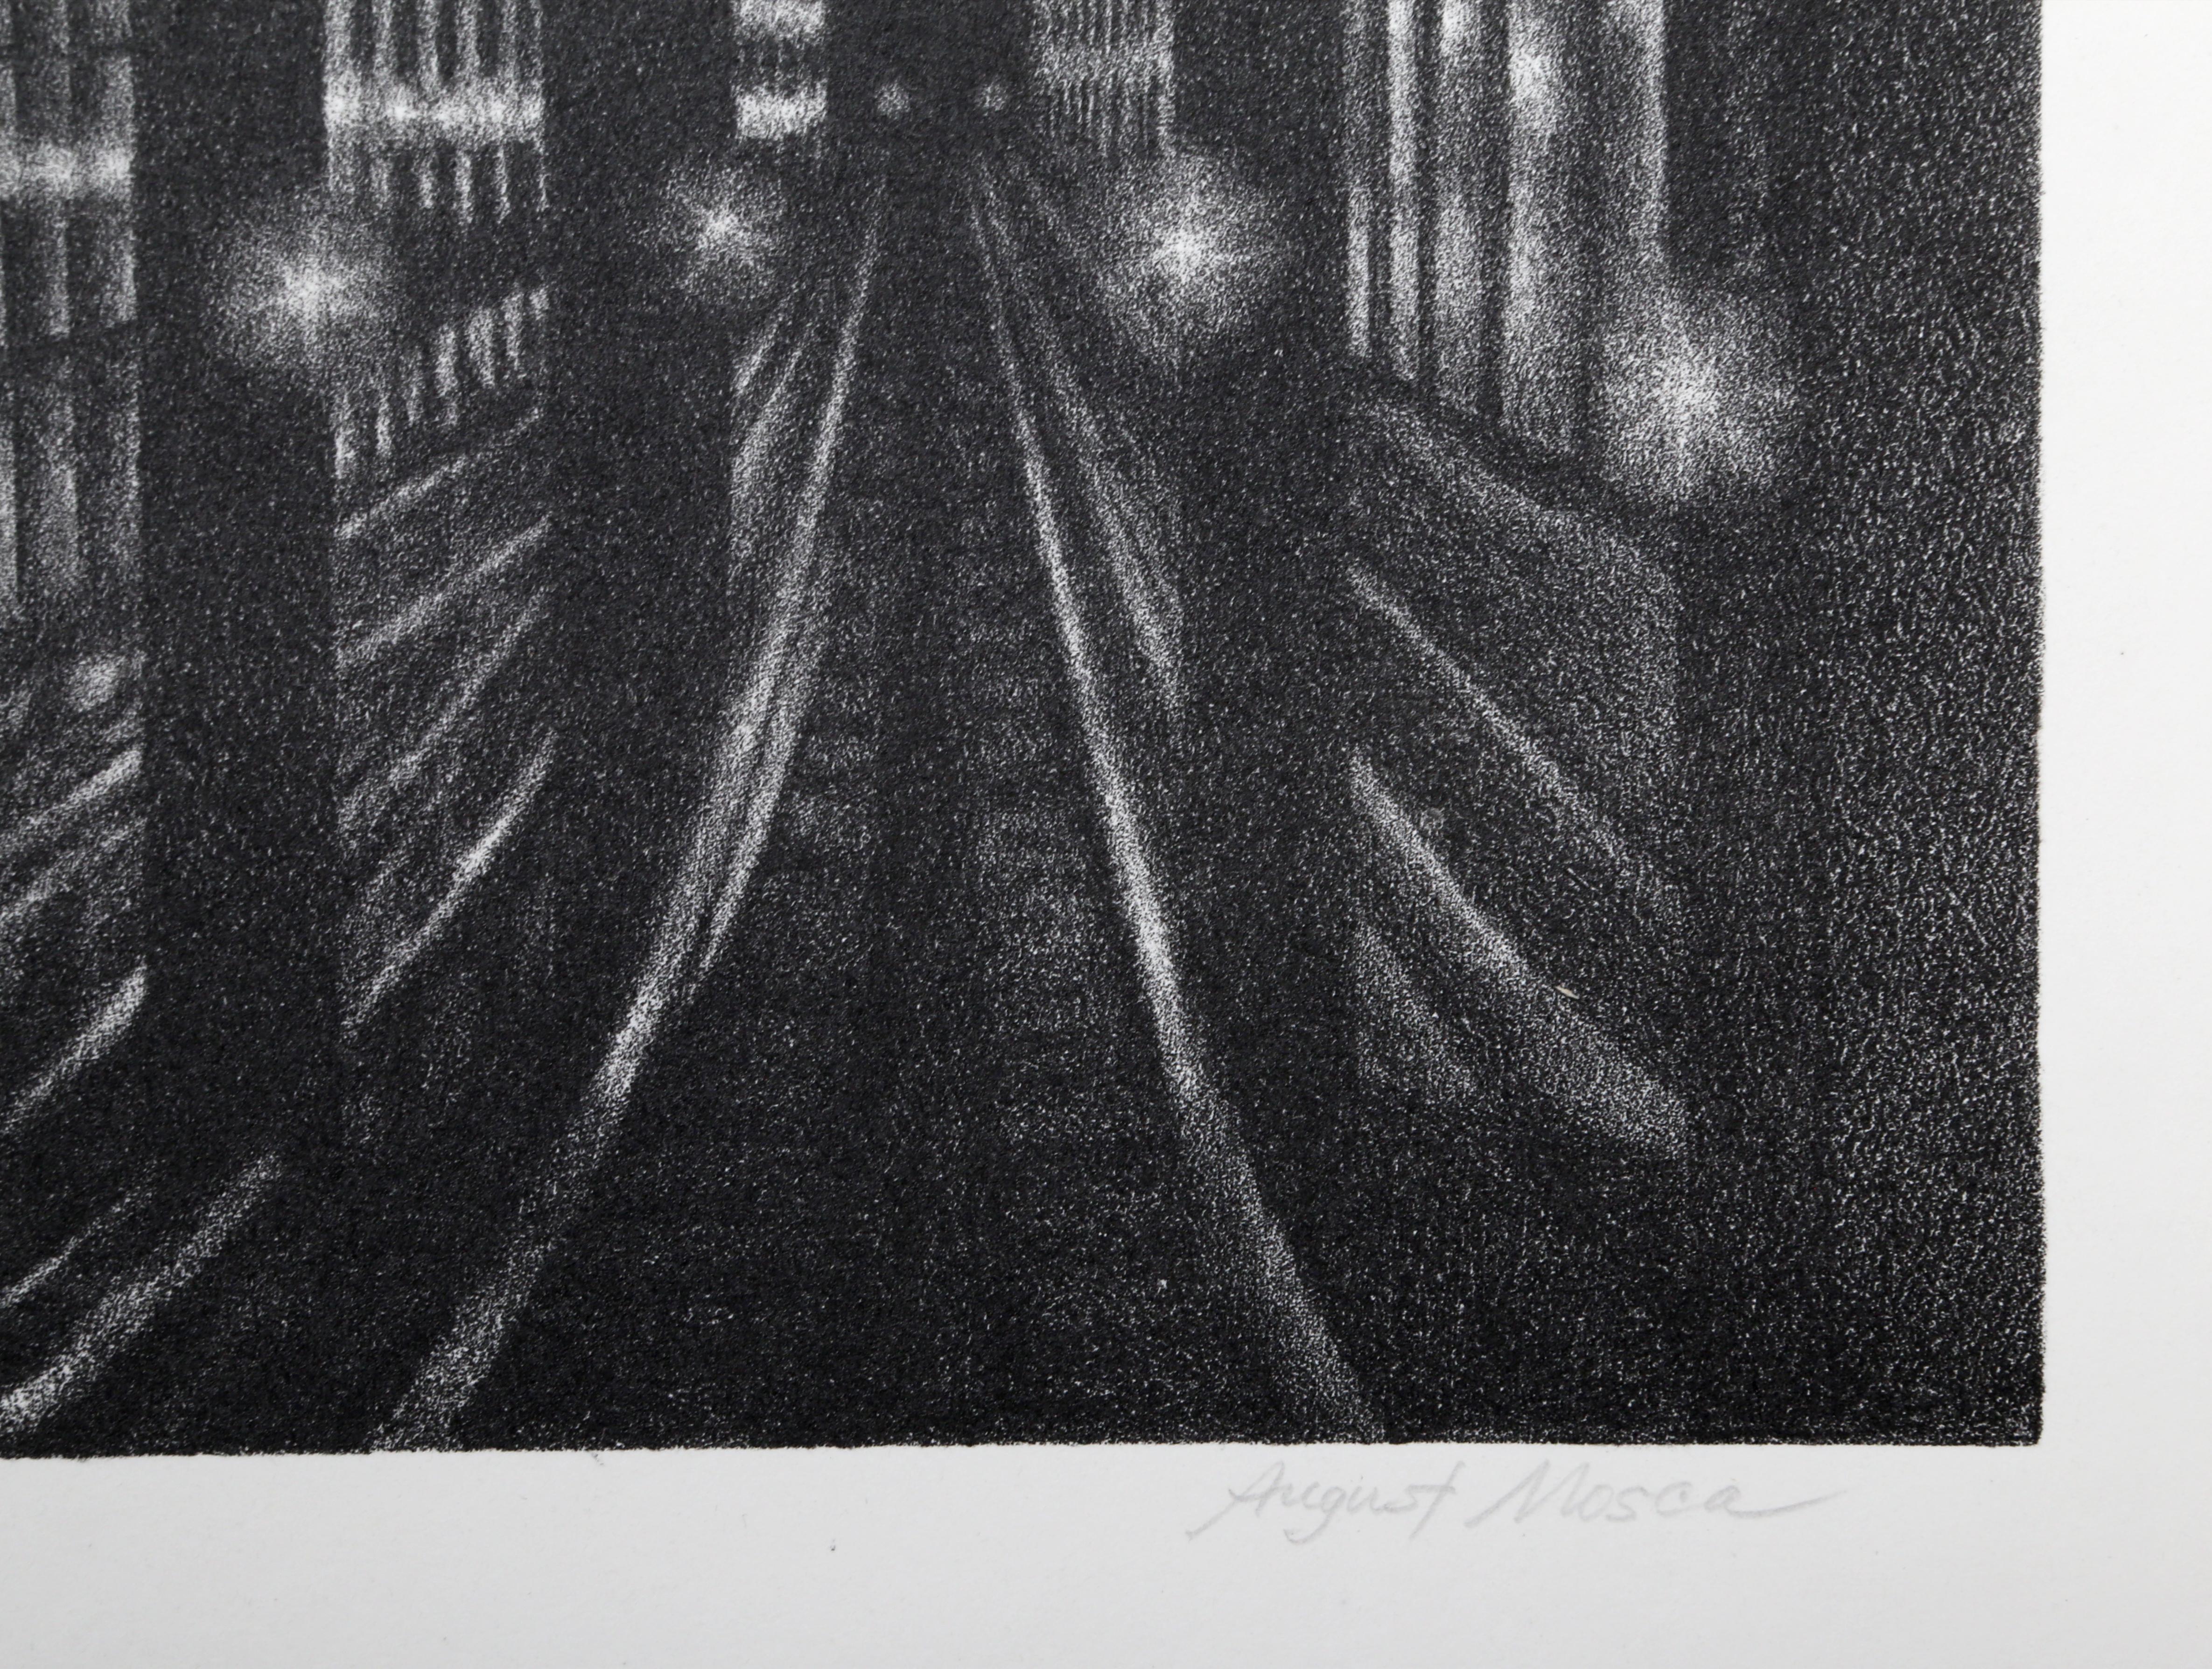 Subway Station, Architectural Etching by August Mosca For Sale 1